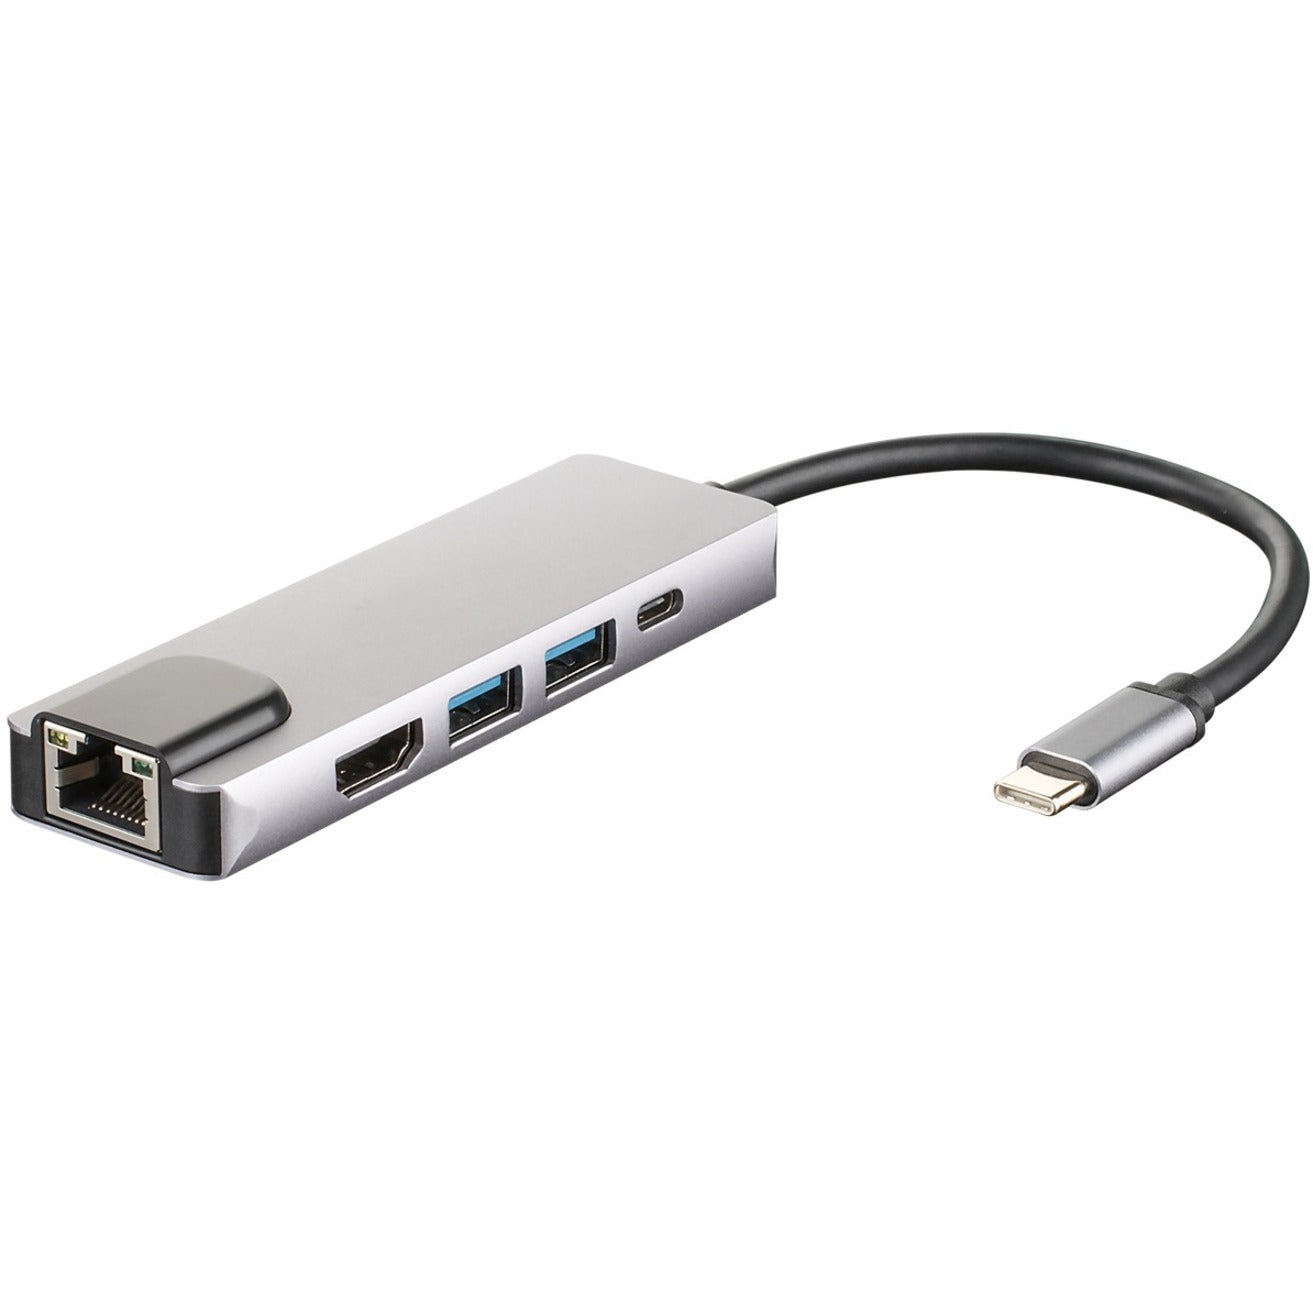 4XEM 4XUSBCHUB08 5-in-1 HDMI, RJ-45, USB 3.0, USB-C Dock, Compatible with MacBook, Dell, Samsung, HP, and More